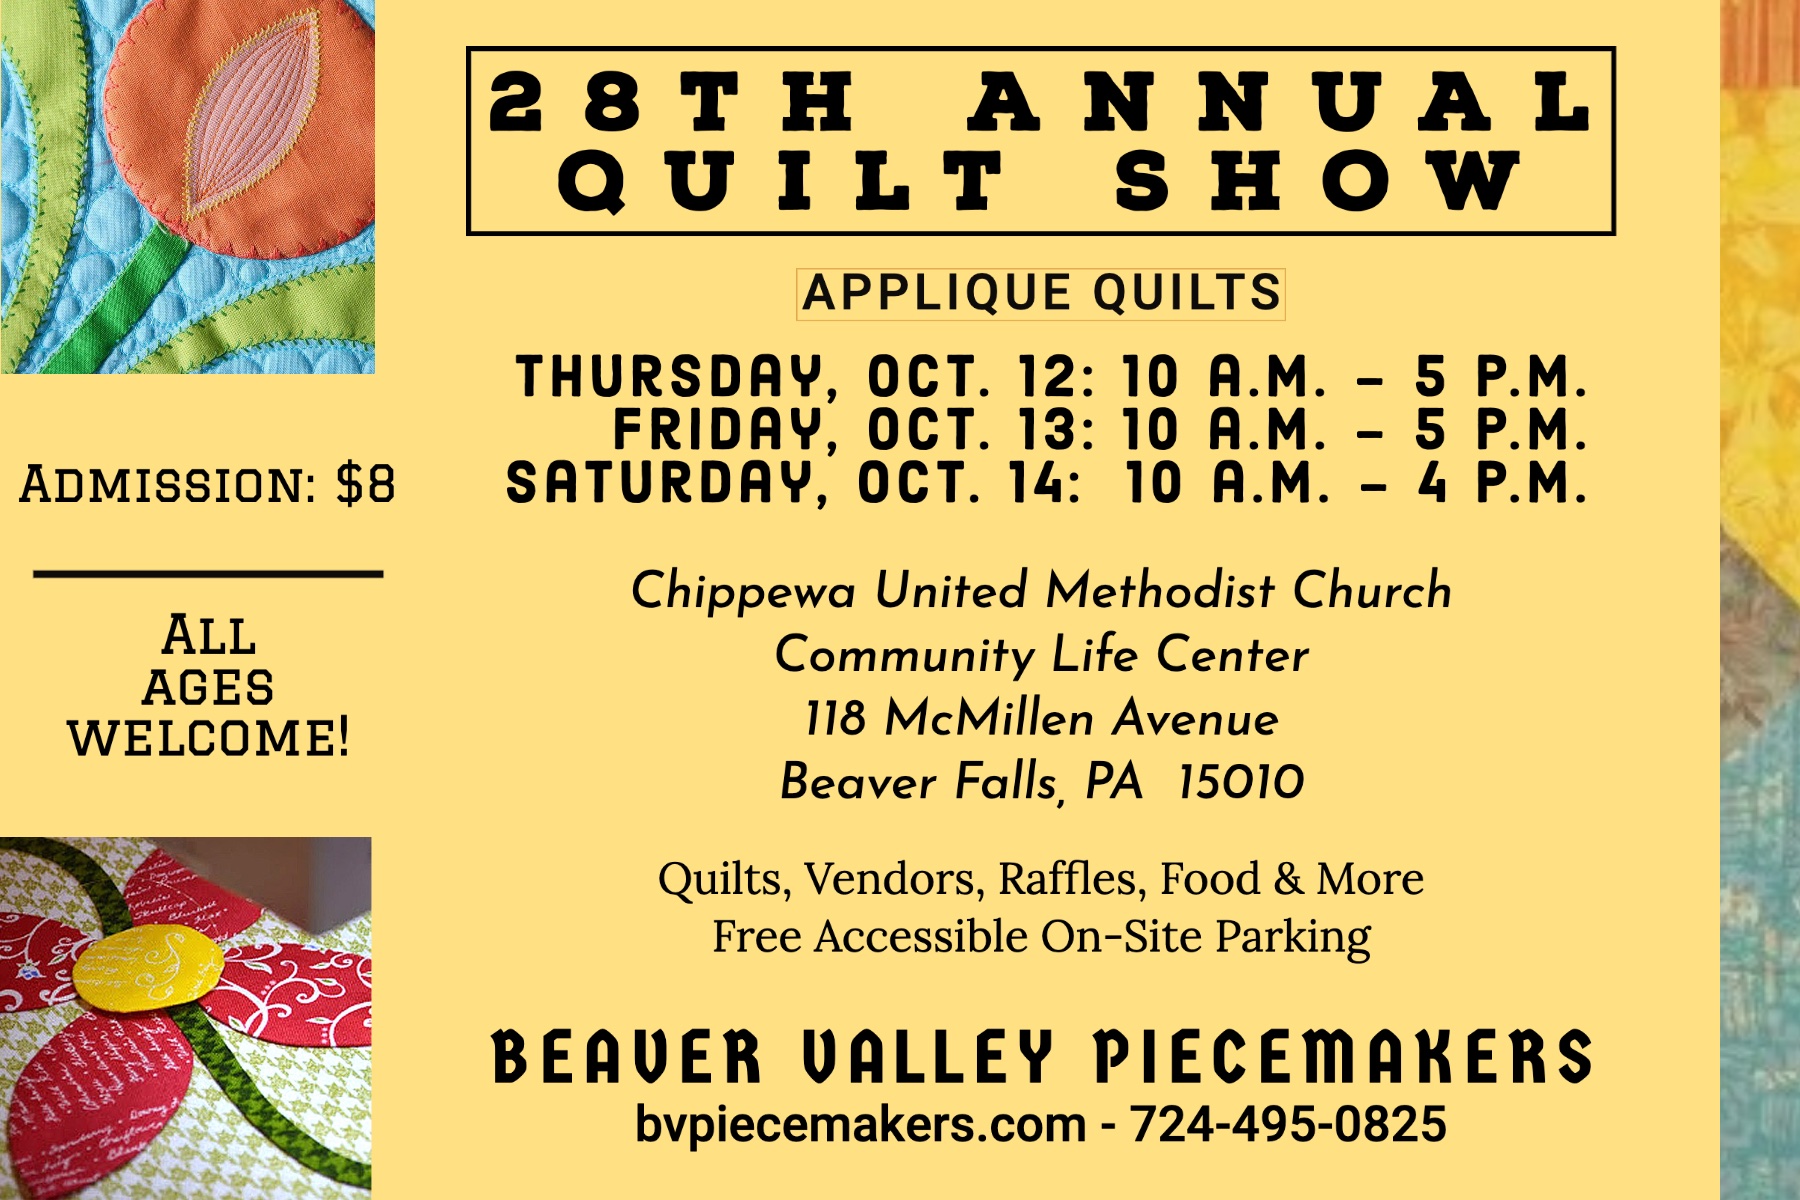 Beaver County 28th Annual Quilt Show